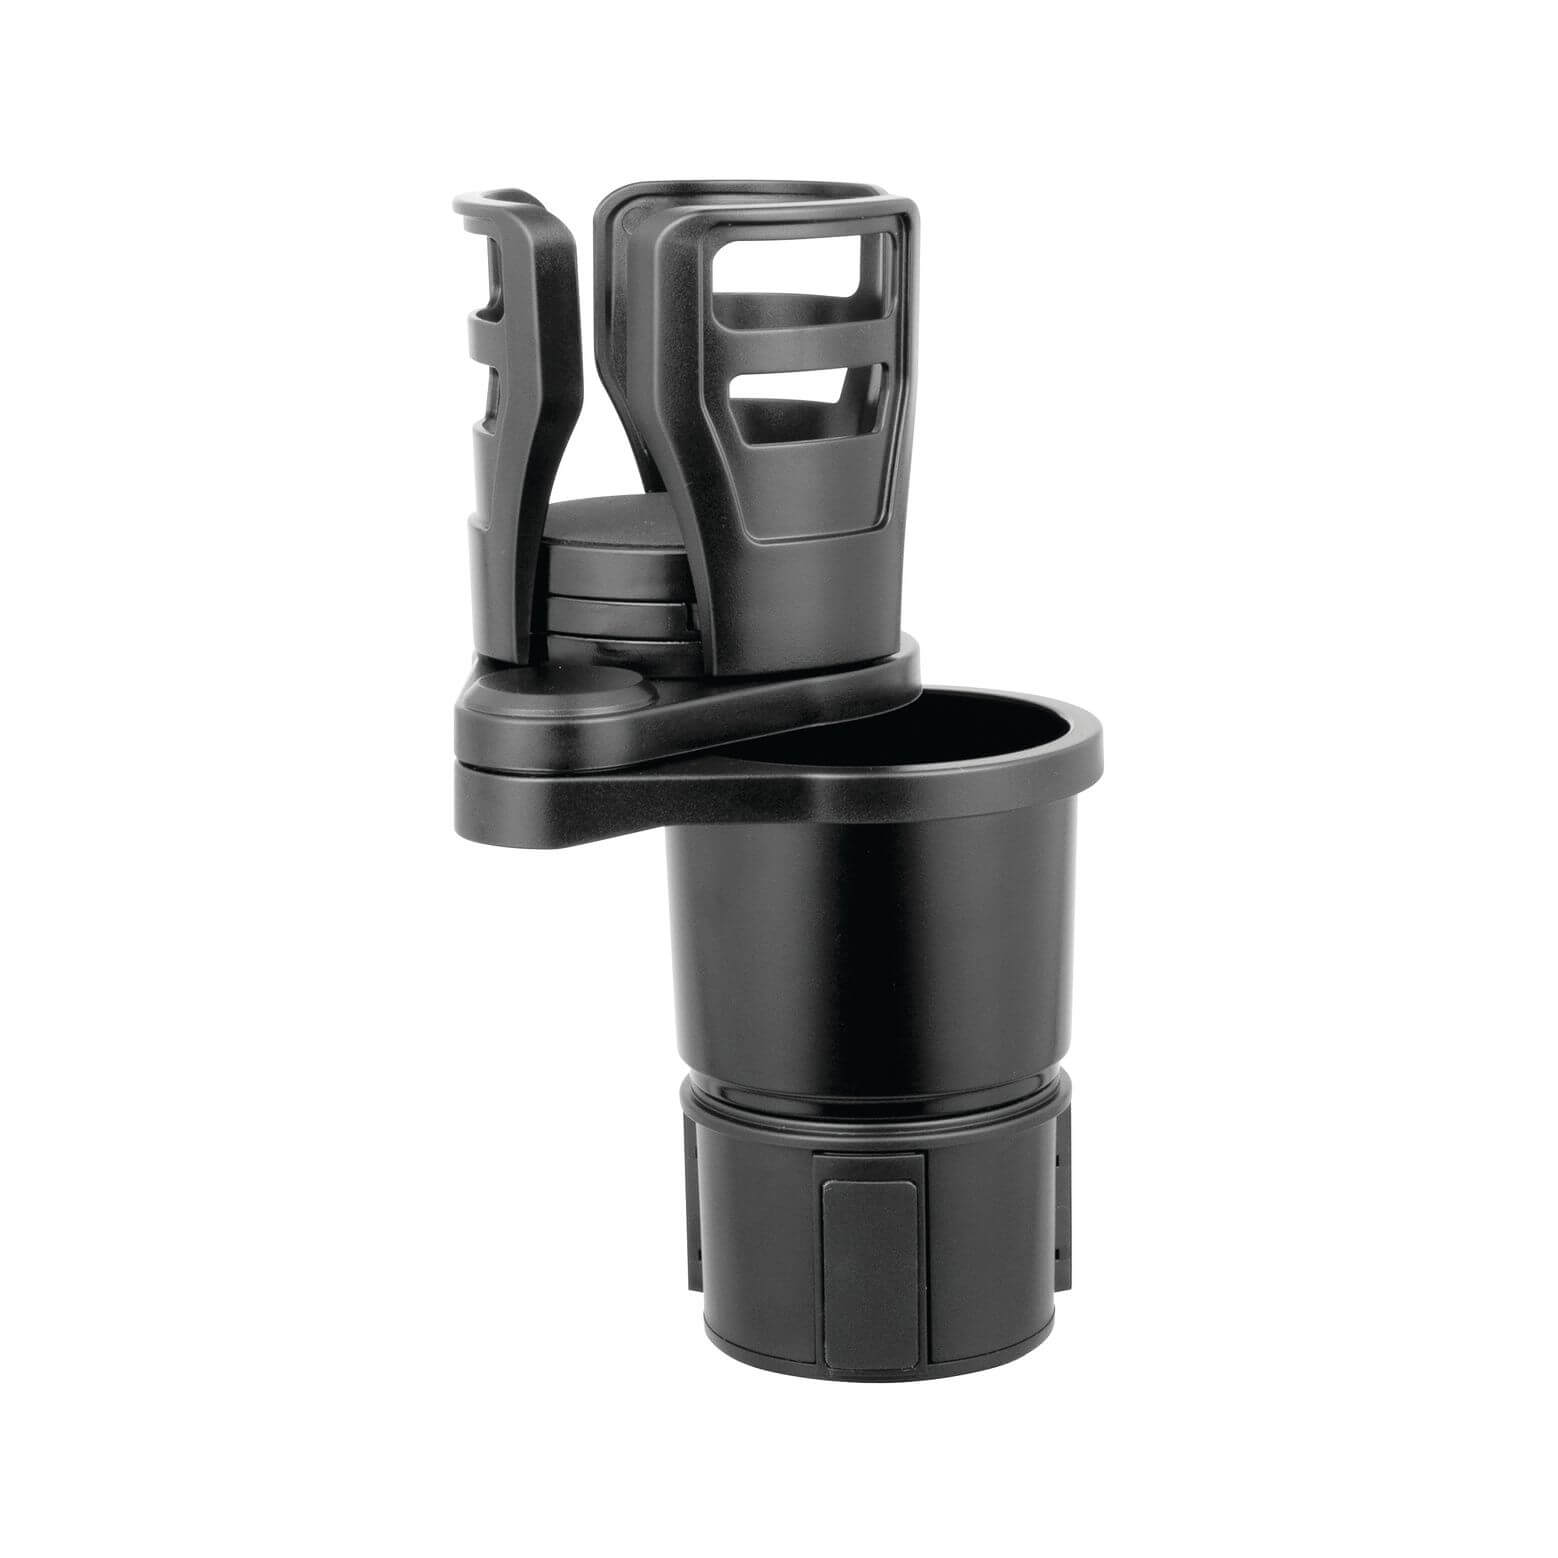 Avanti Expandable Car Cup Holder Black - LIFESTYLE - Water Bottles - Soko and Co